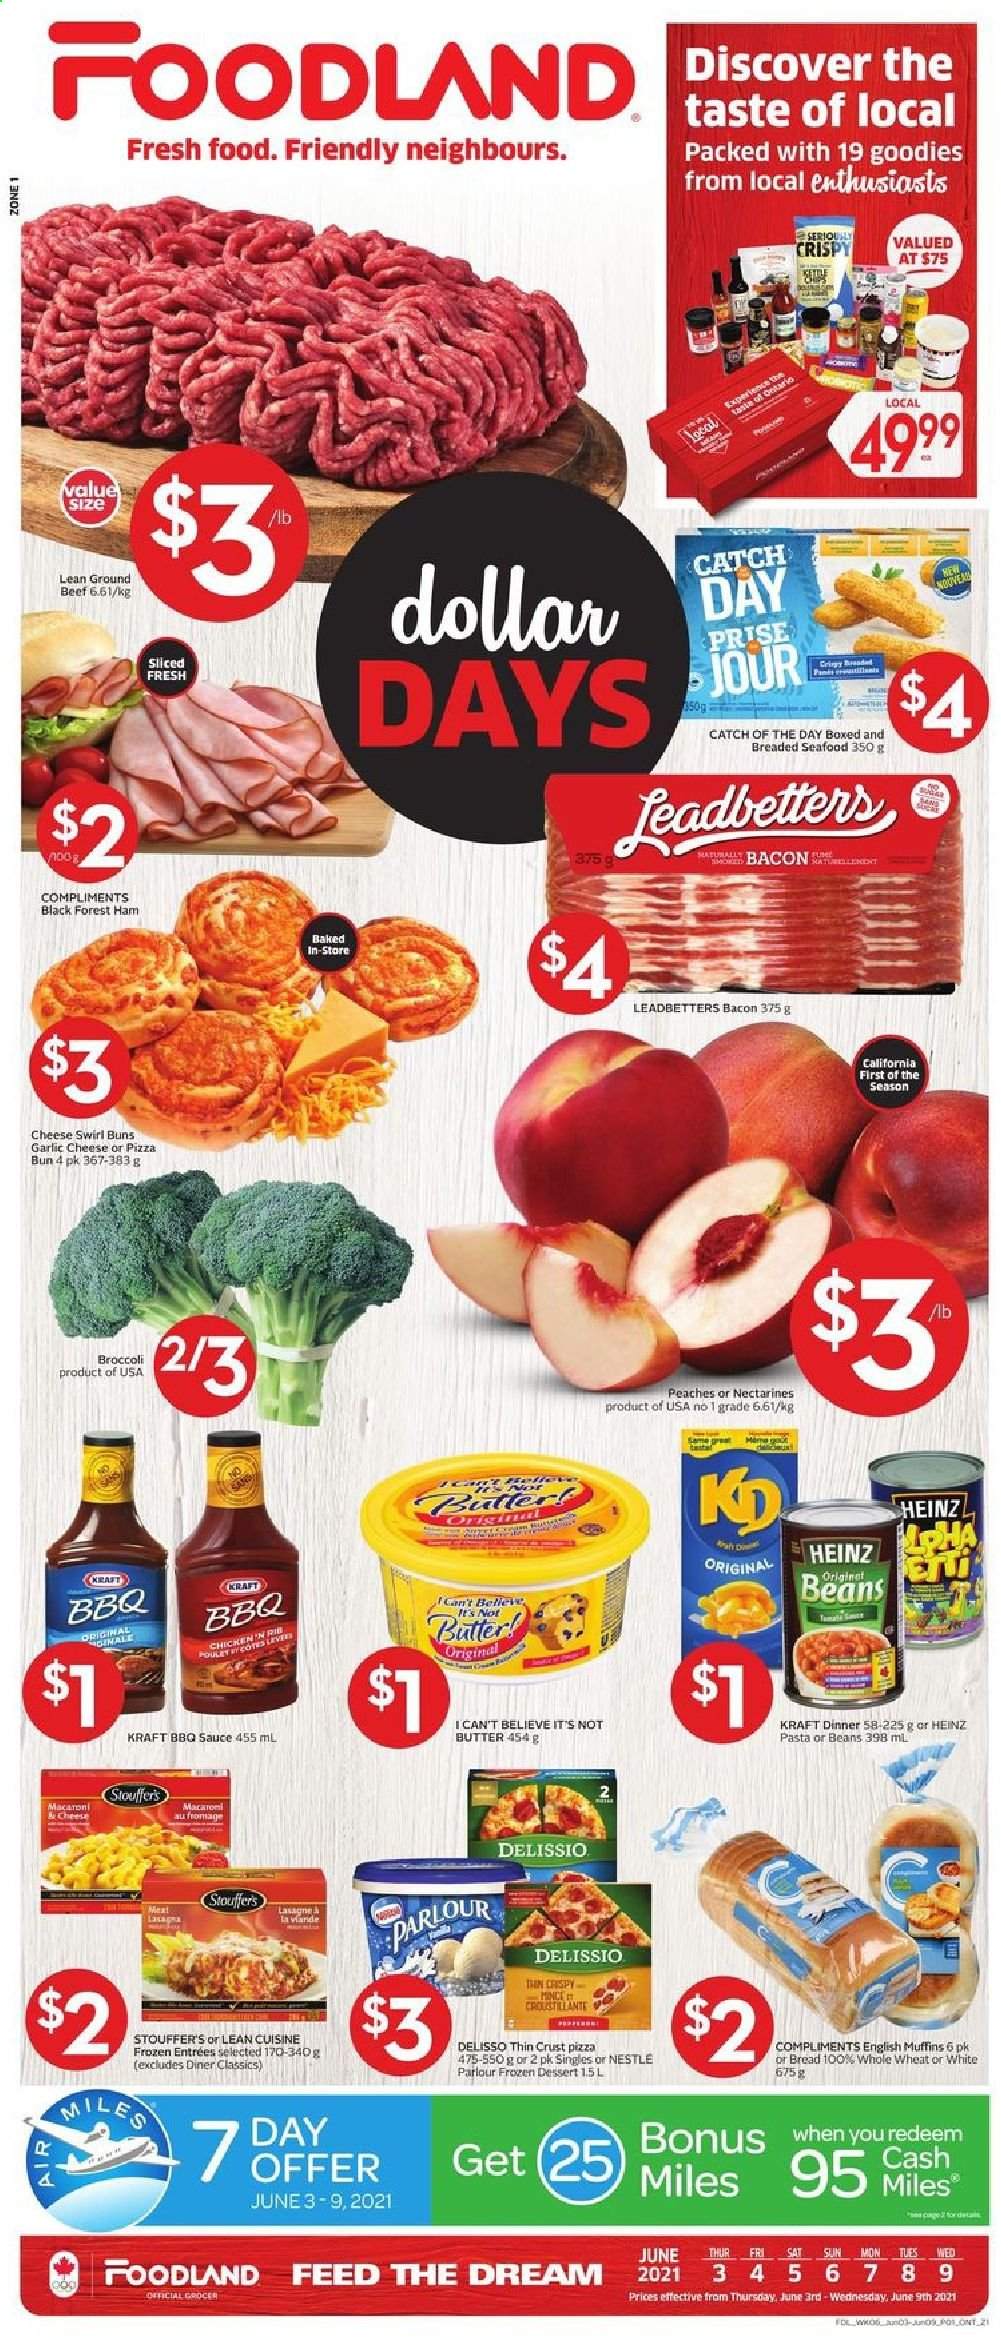 thumbnail - Foodland Flyer - June 03, 2021 - June 09, 2021 - Sales products - bread, english muffins, buns, beans, broccoli, garlic, nectarines, peaches, seafood, pizza, sauce, Lean Cuisine, Kraft®, bacon, ham, butter, I Can't Believe It's Not Butter, Stouffer's, Heinz, BBQ sauce, beef meat, ground beef, Nestlé. Page 1.